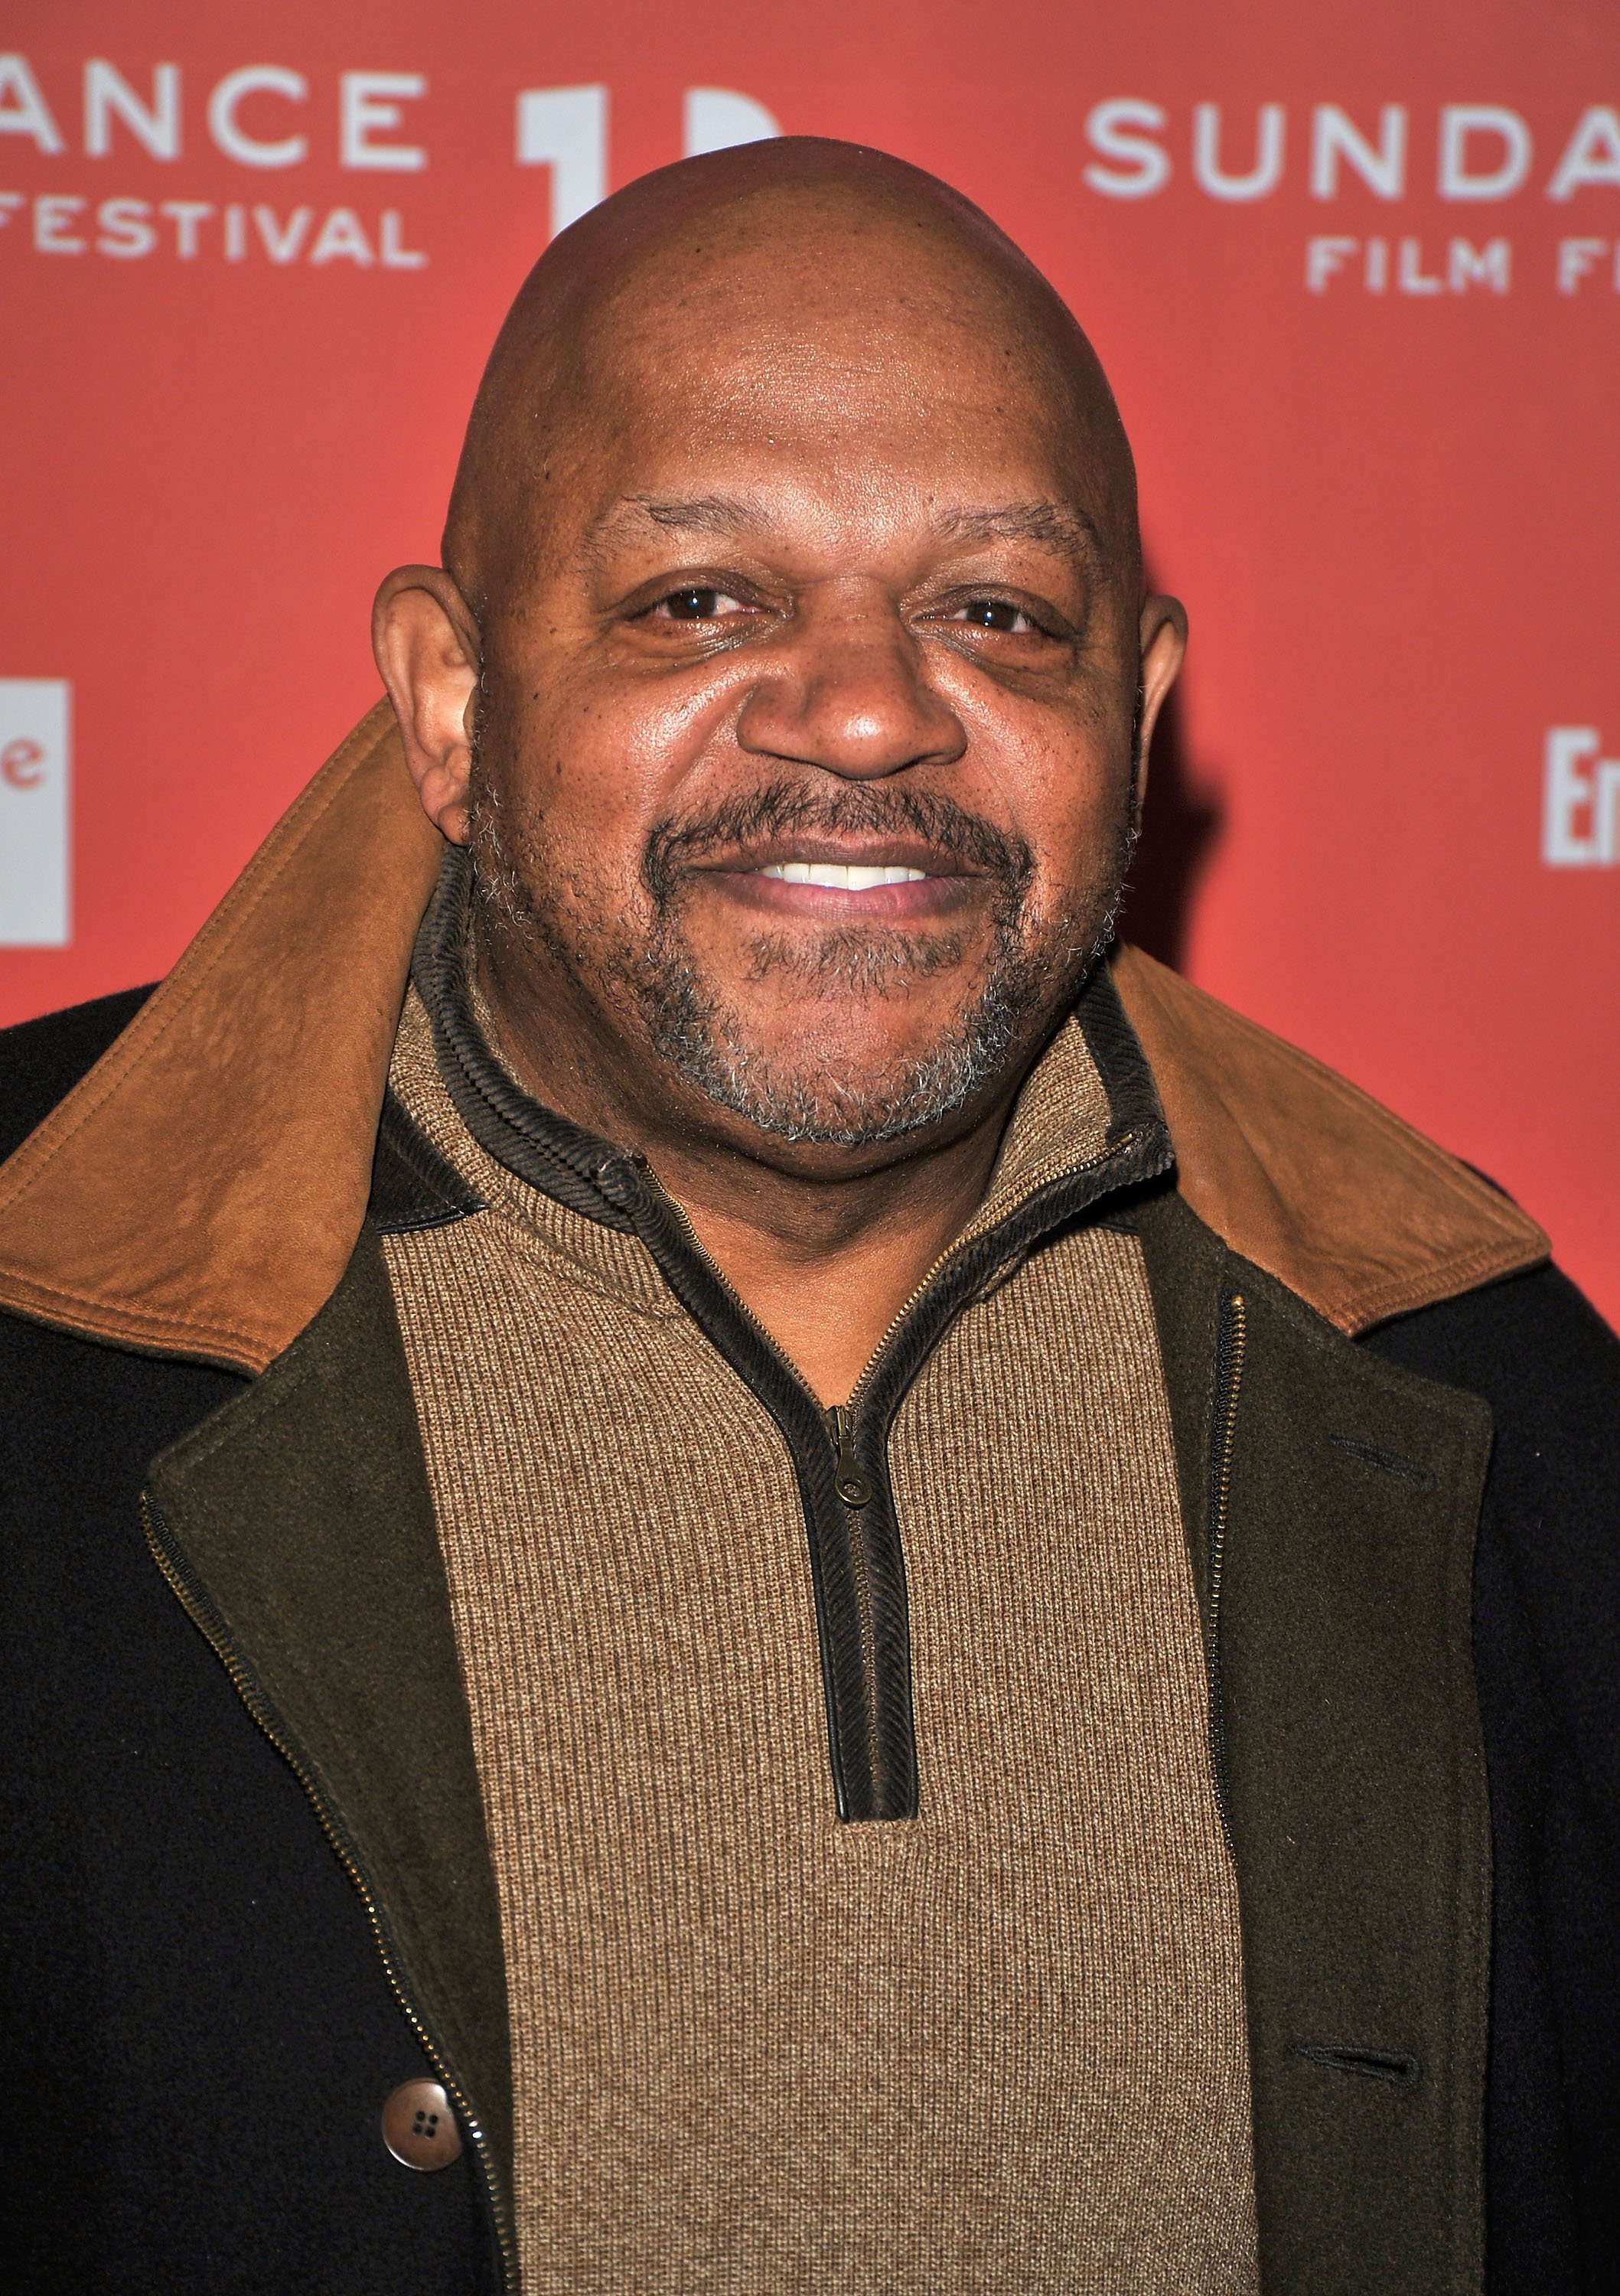 Charles S. Dutton attends the "LUV" premiere during the 2012 Sundance Film Festival on January 23, 2012 in Park City, Utah. | Photo: Getty Images